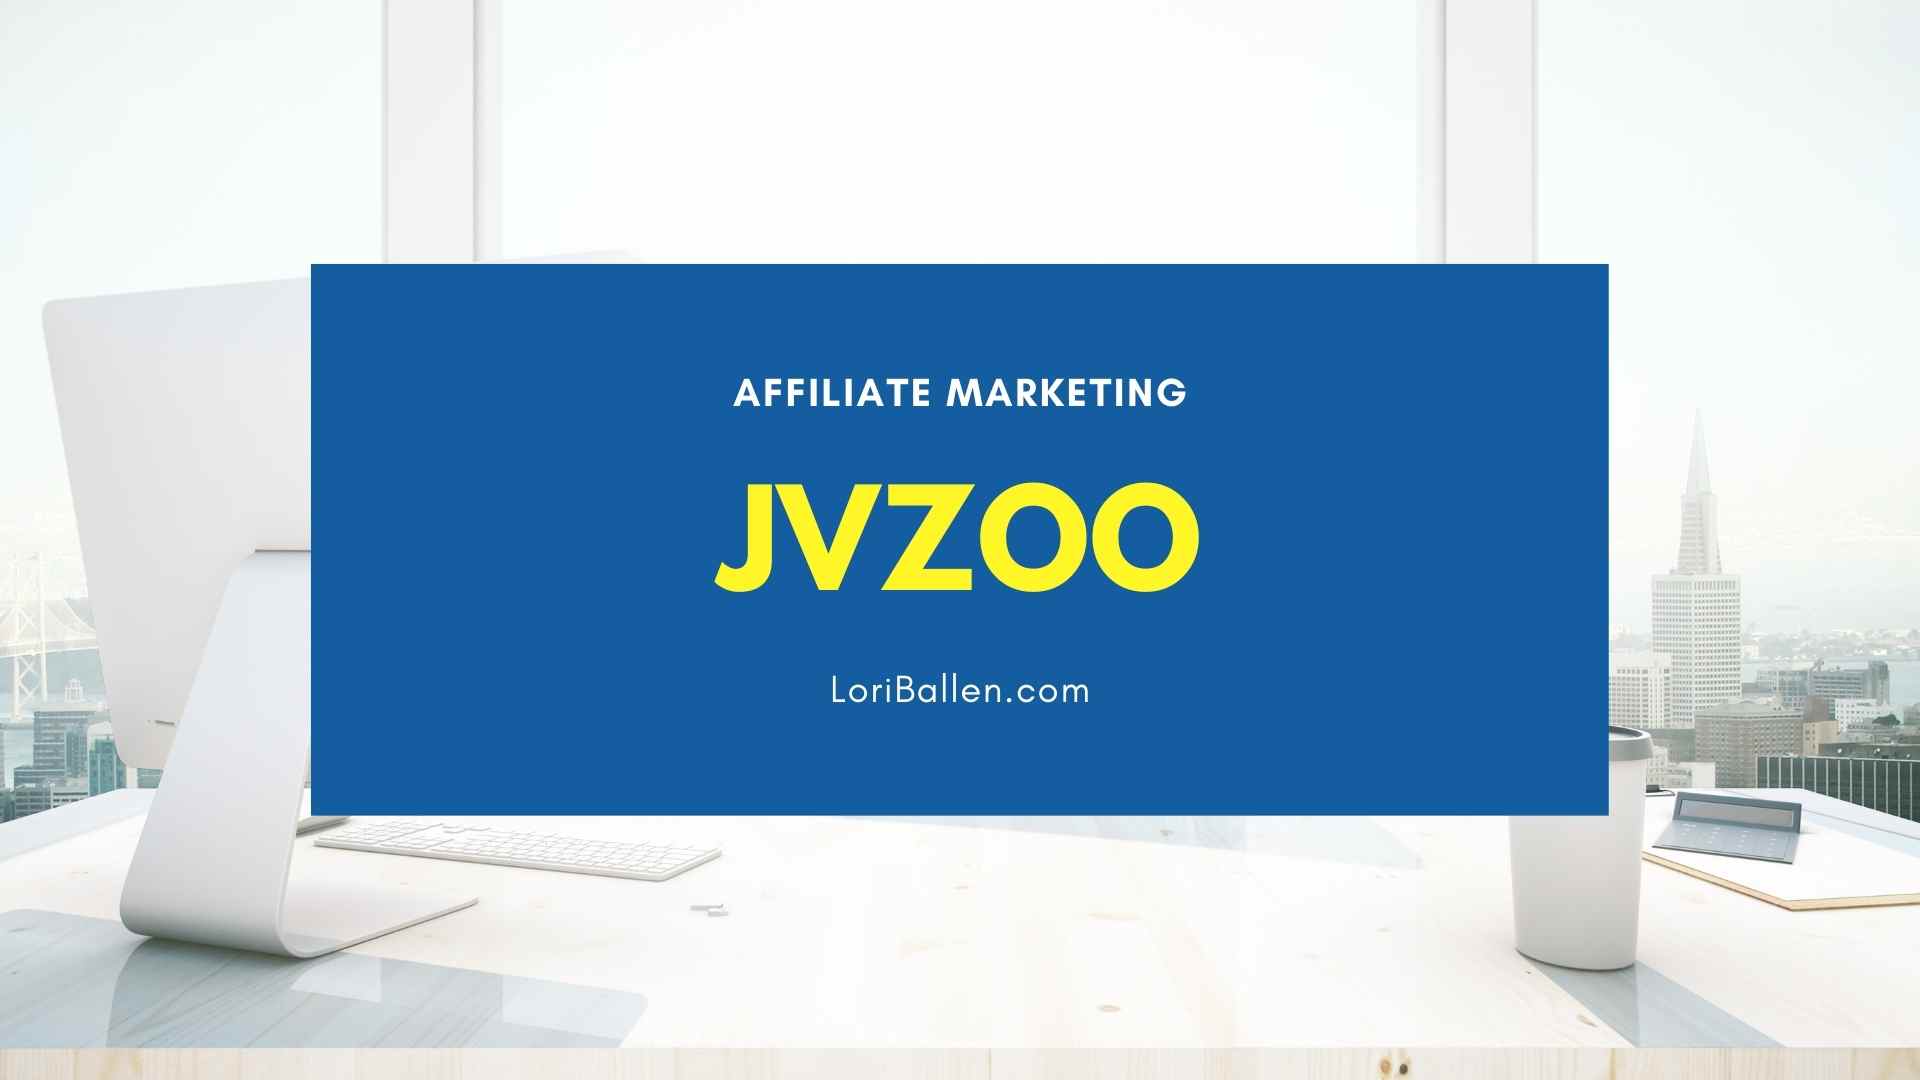 which focuses on digital products, JVzoo offers a wider range of products, including physical goods, software, and membership sites.